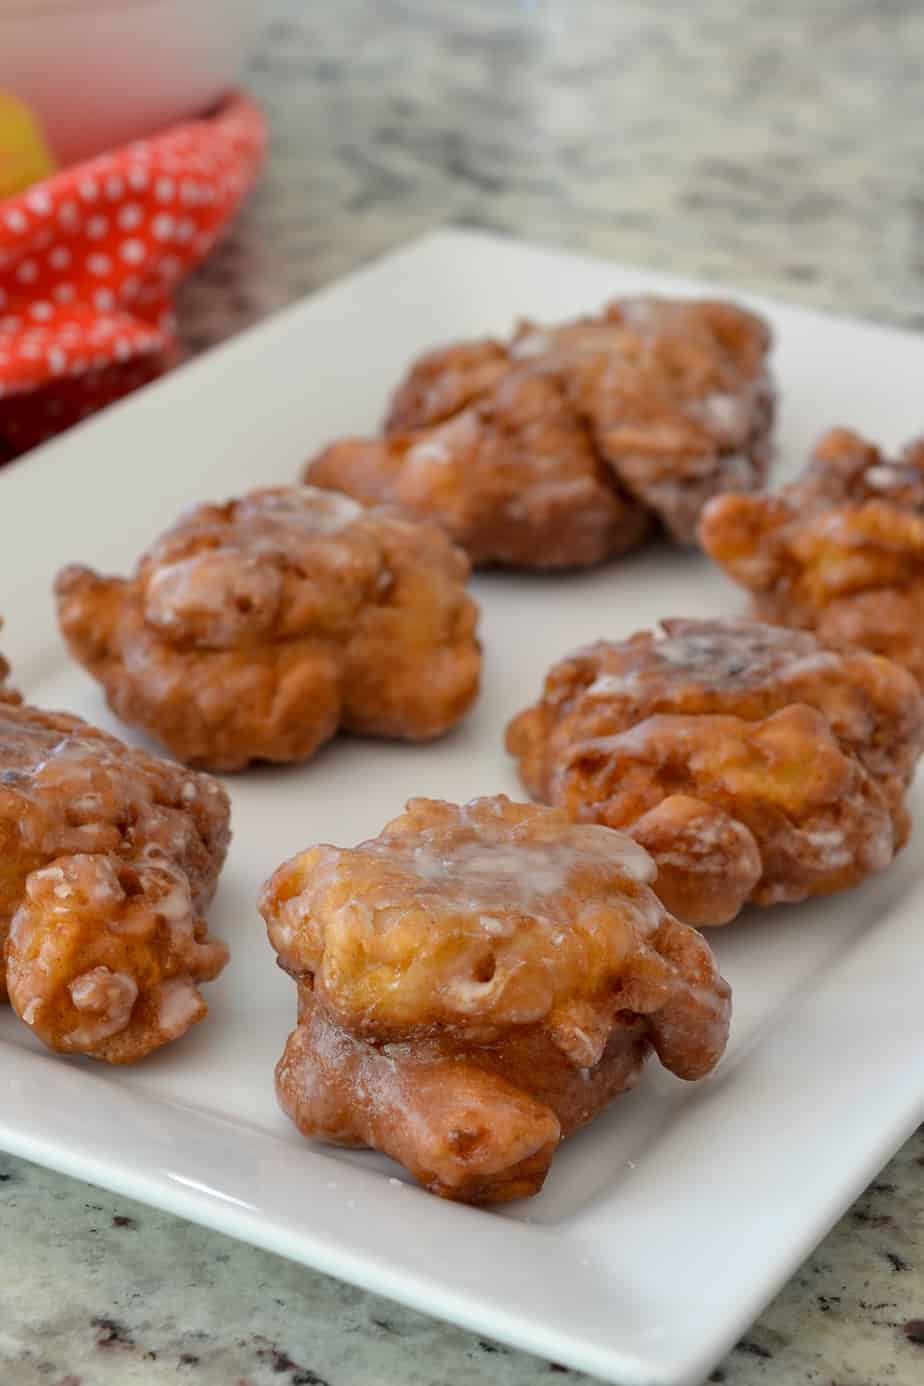 Fry up some warm apple fritters and save that trip to the donut shop. 